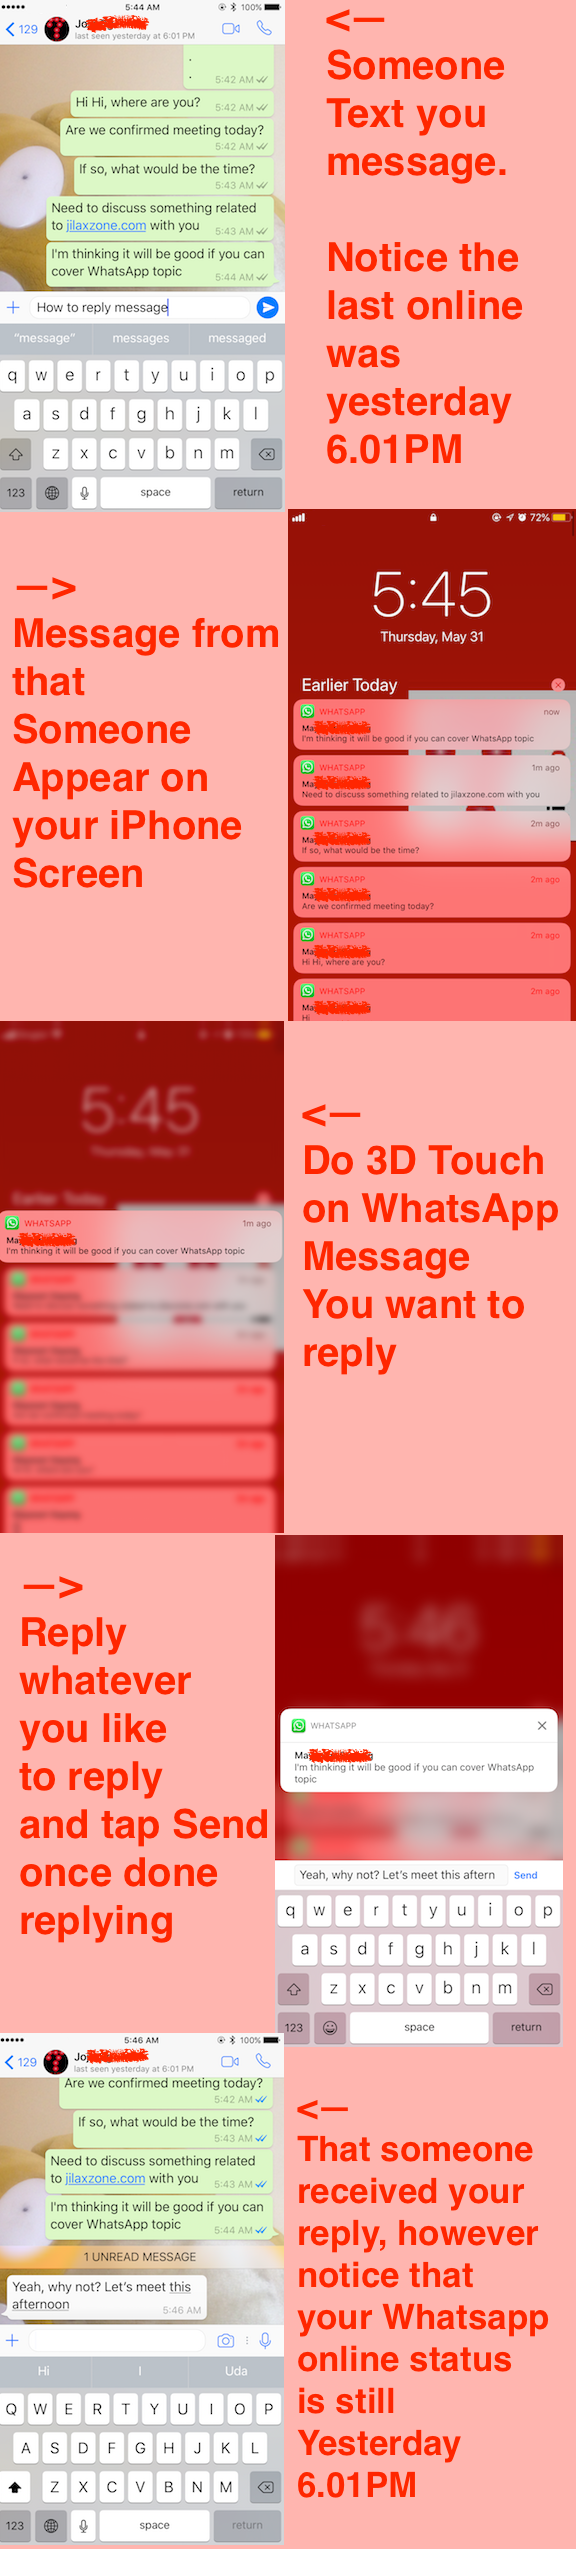 read and reply whatsapp message without getting online on iPhone jilaxzone.com